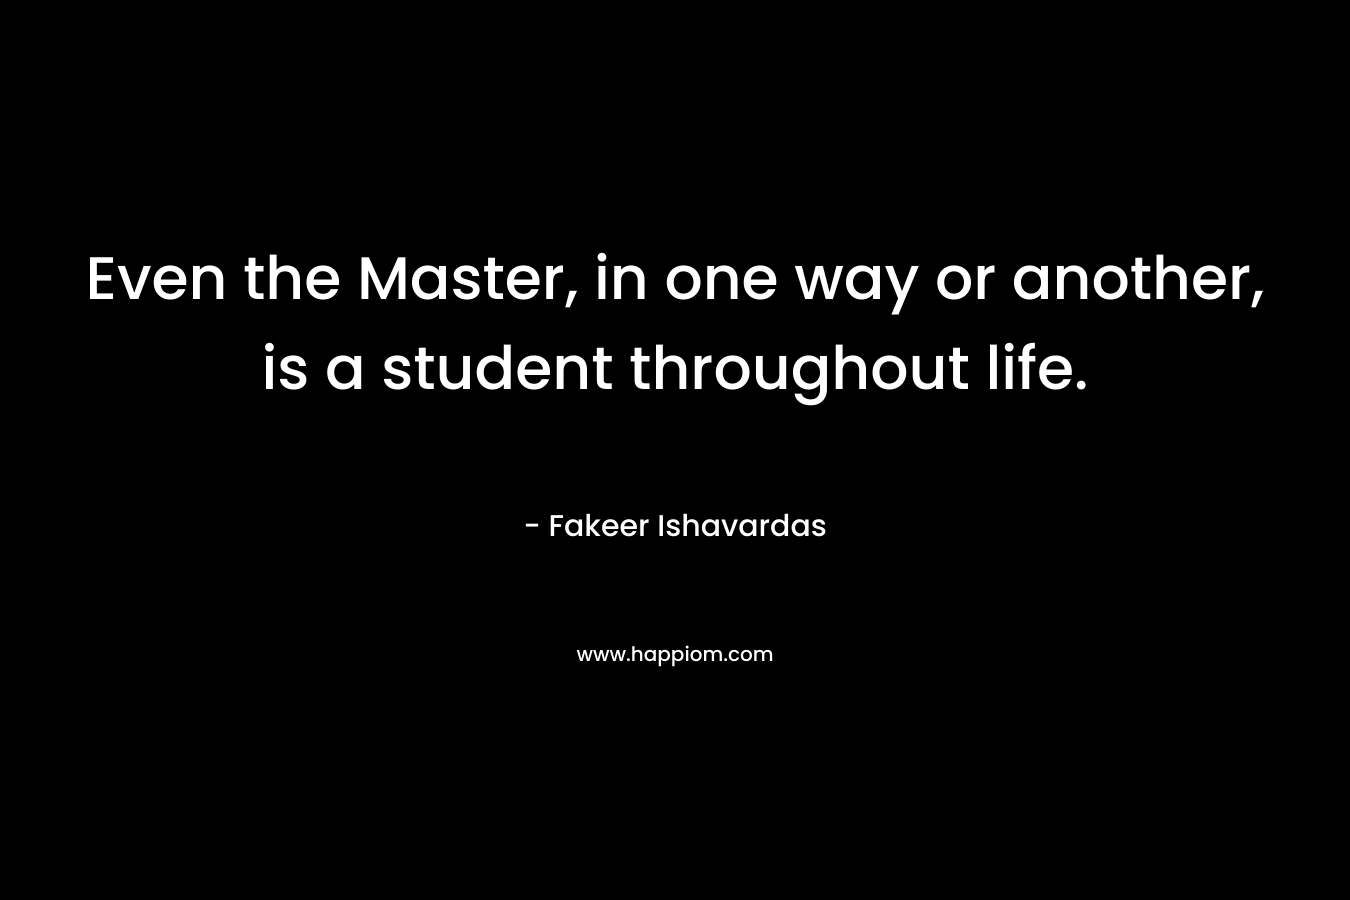 Even the Master, in one way or another, is a student throughout life. – Fakeer Ishavardas